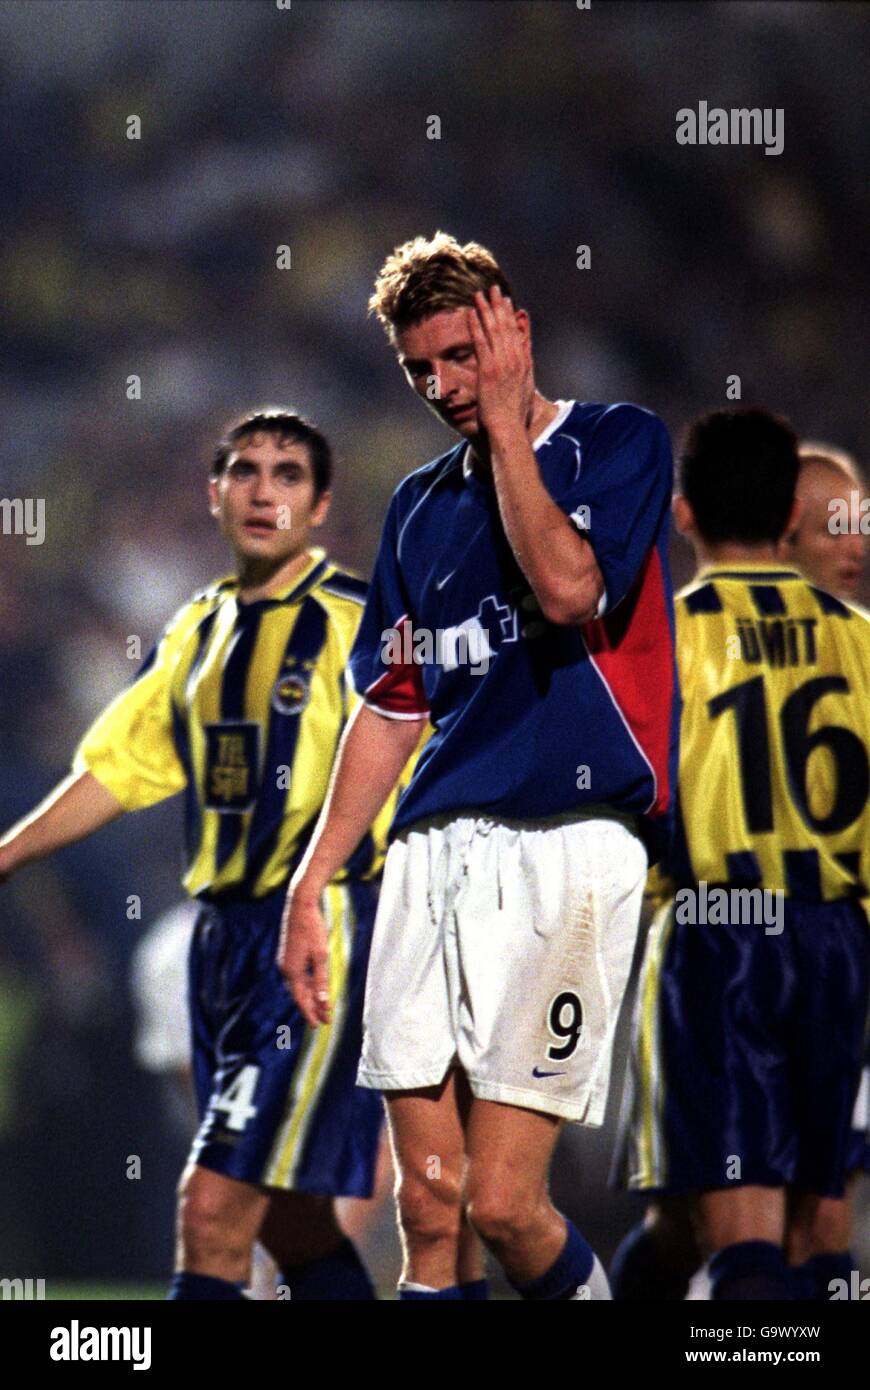 Soccer - UEFA Champions League - Third Qualifying Round Second Leg - Fenerbahce v Rangers. Rangers' Tore Andre Flo holds his head after a collision Stock Photo